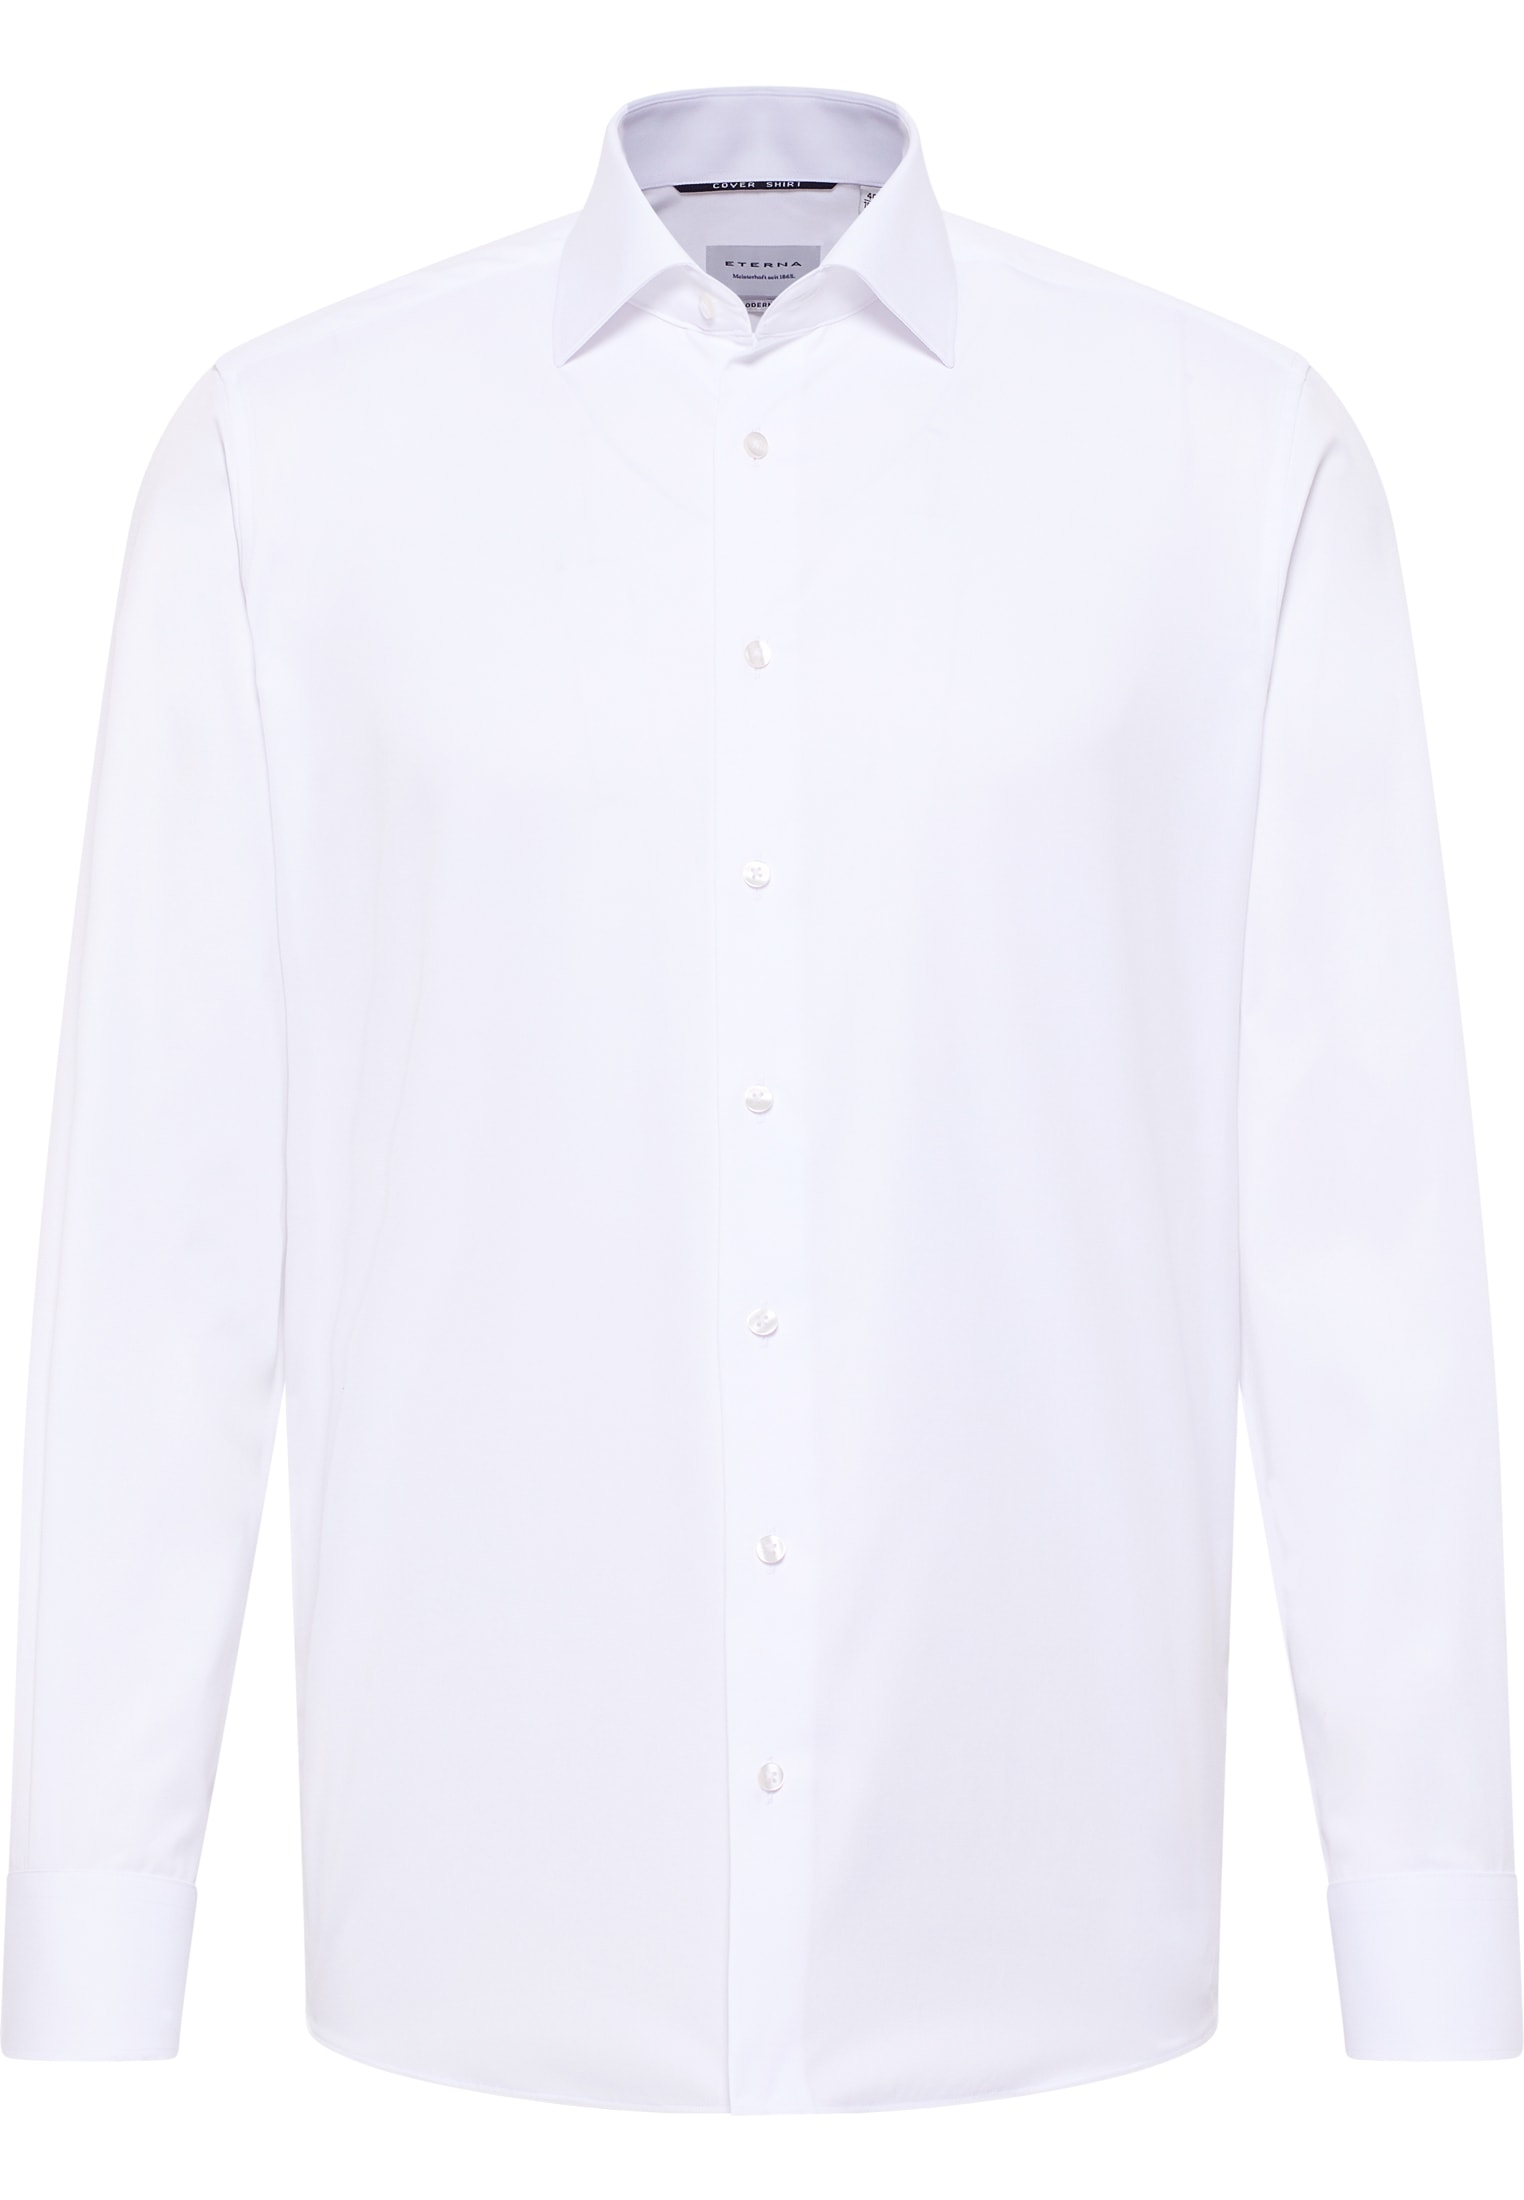 MODERN FIT Cover Shirt in wit vlakte